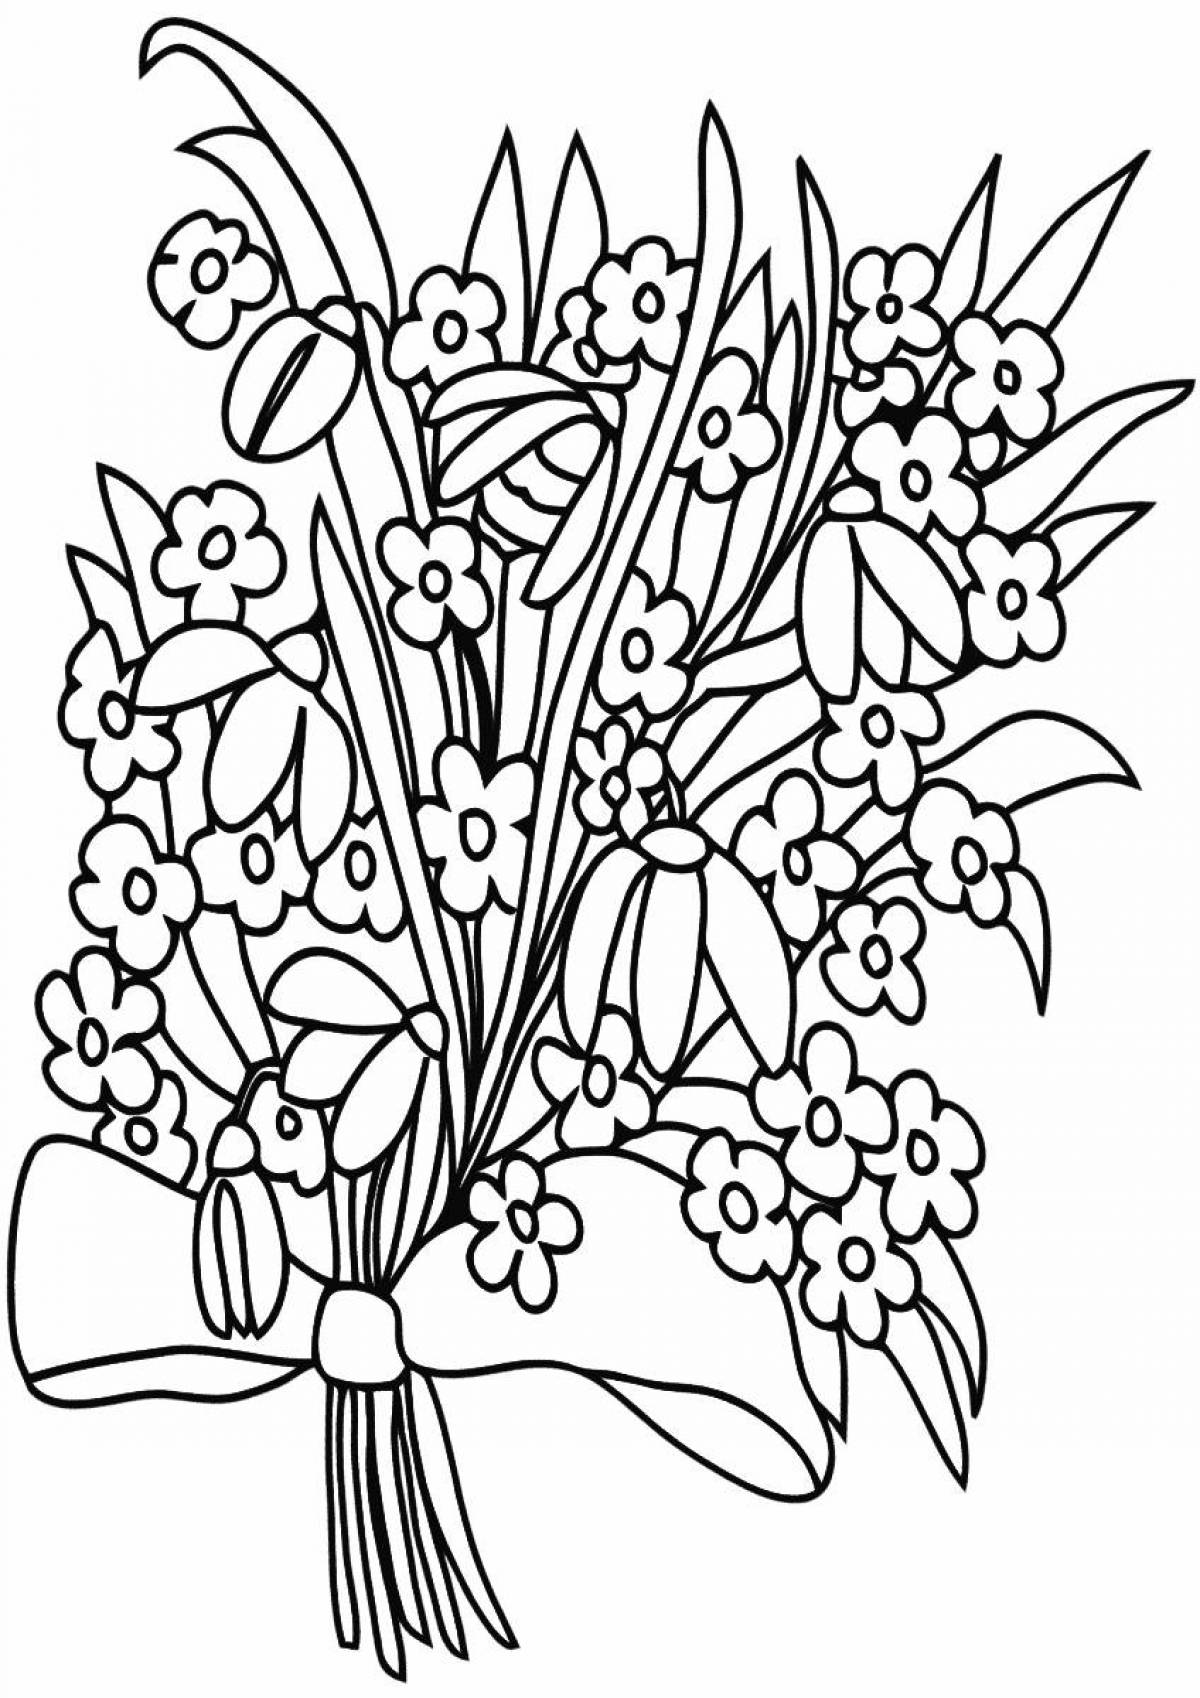 Forget-me-not coloring book with a bow